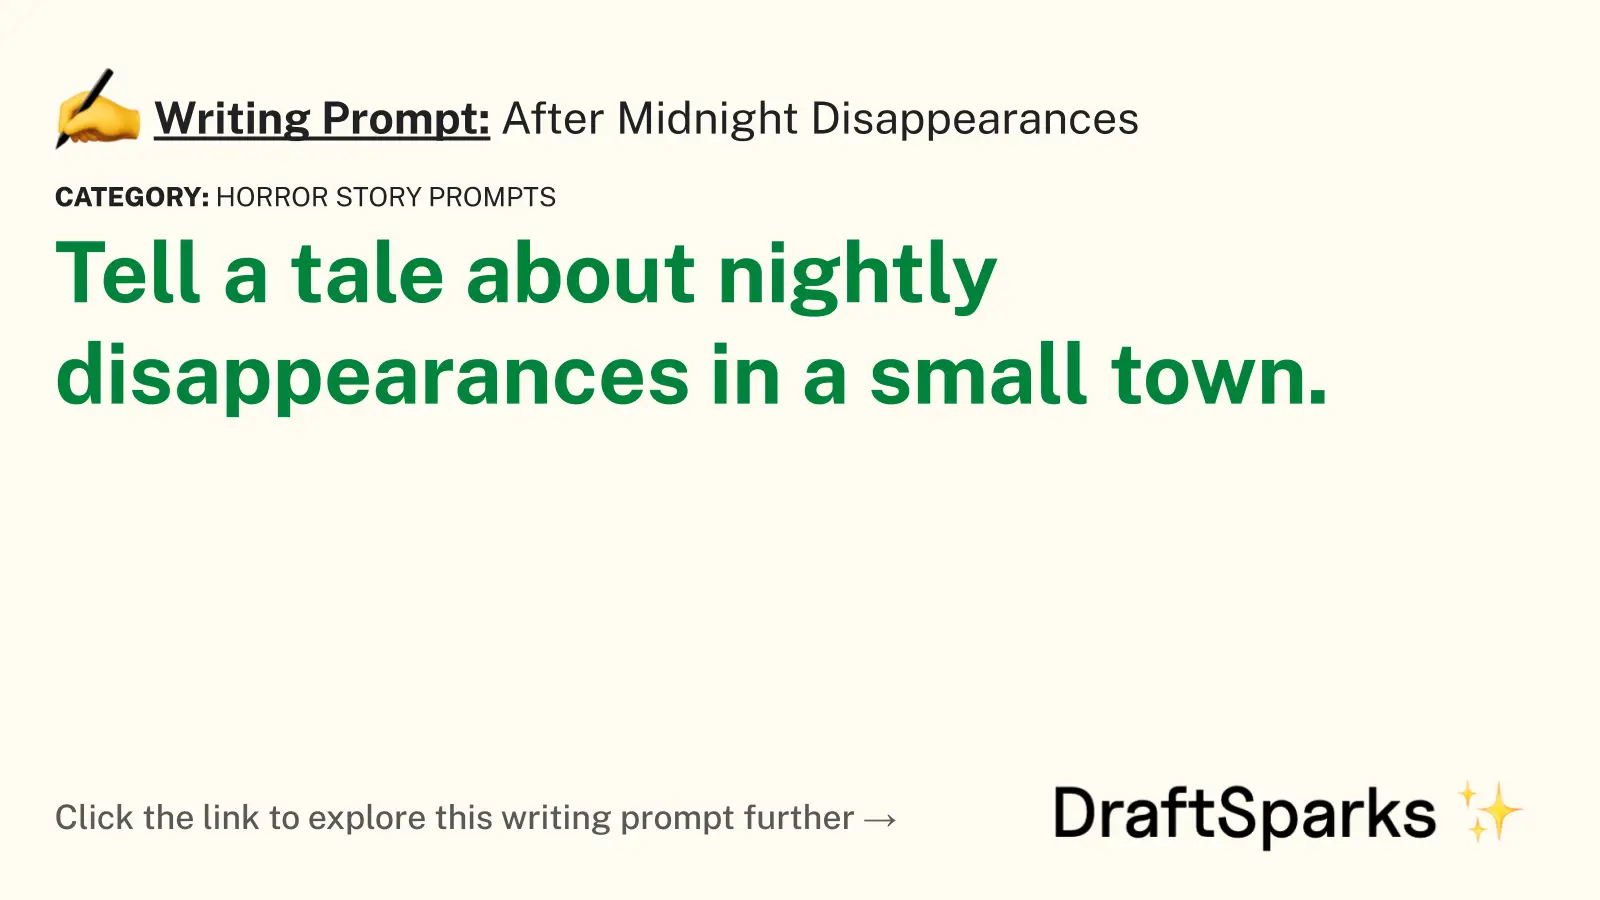 After Midnight Disappearances